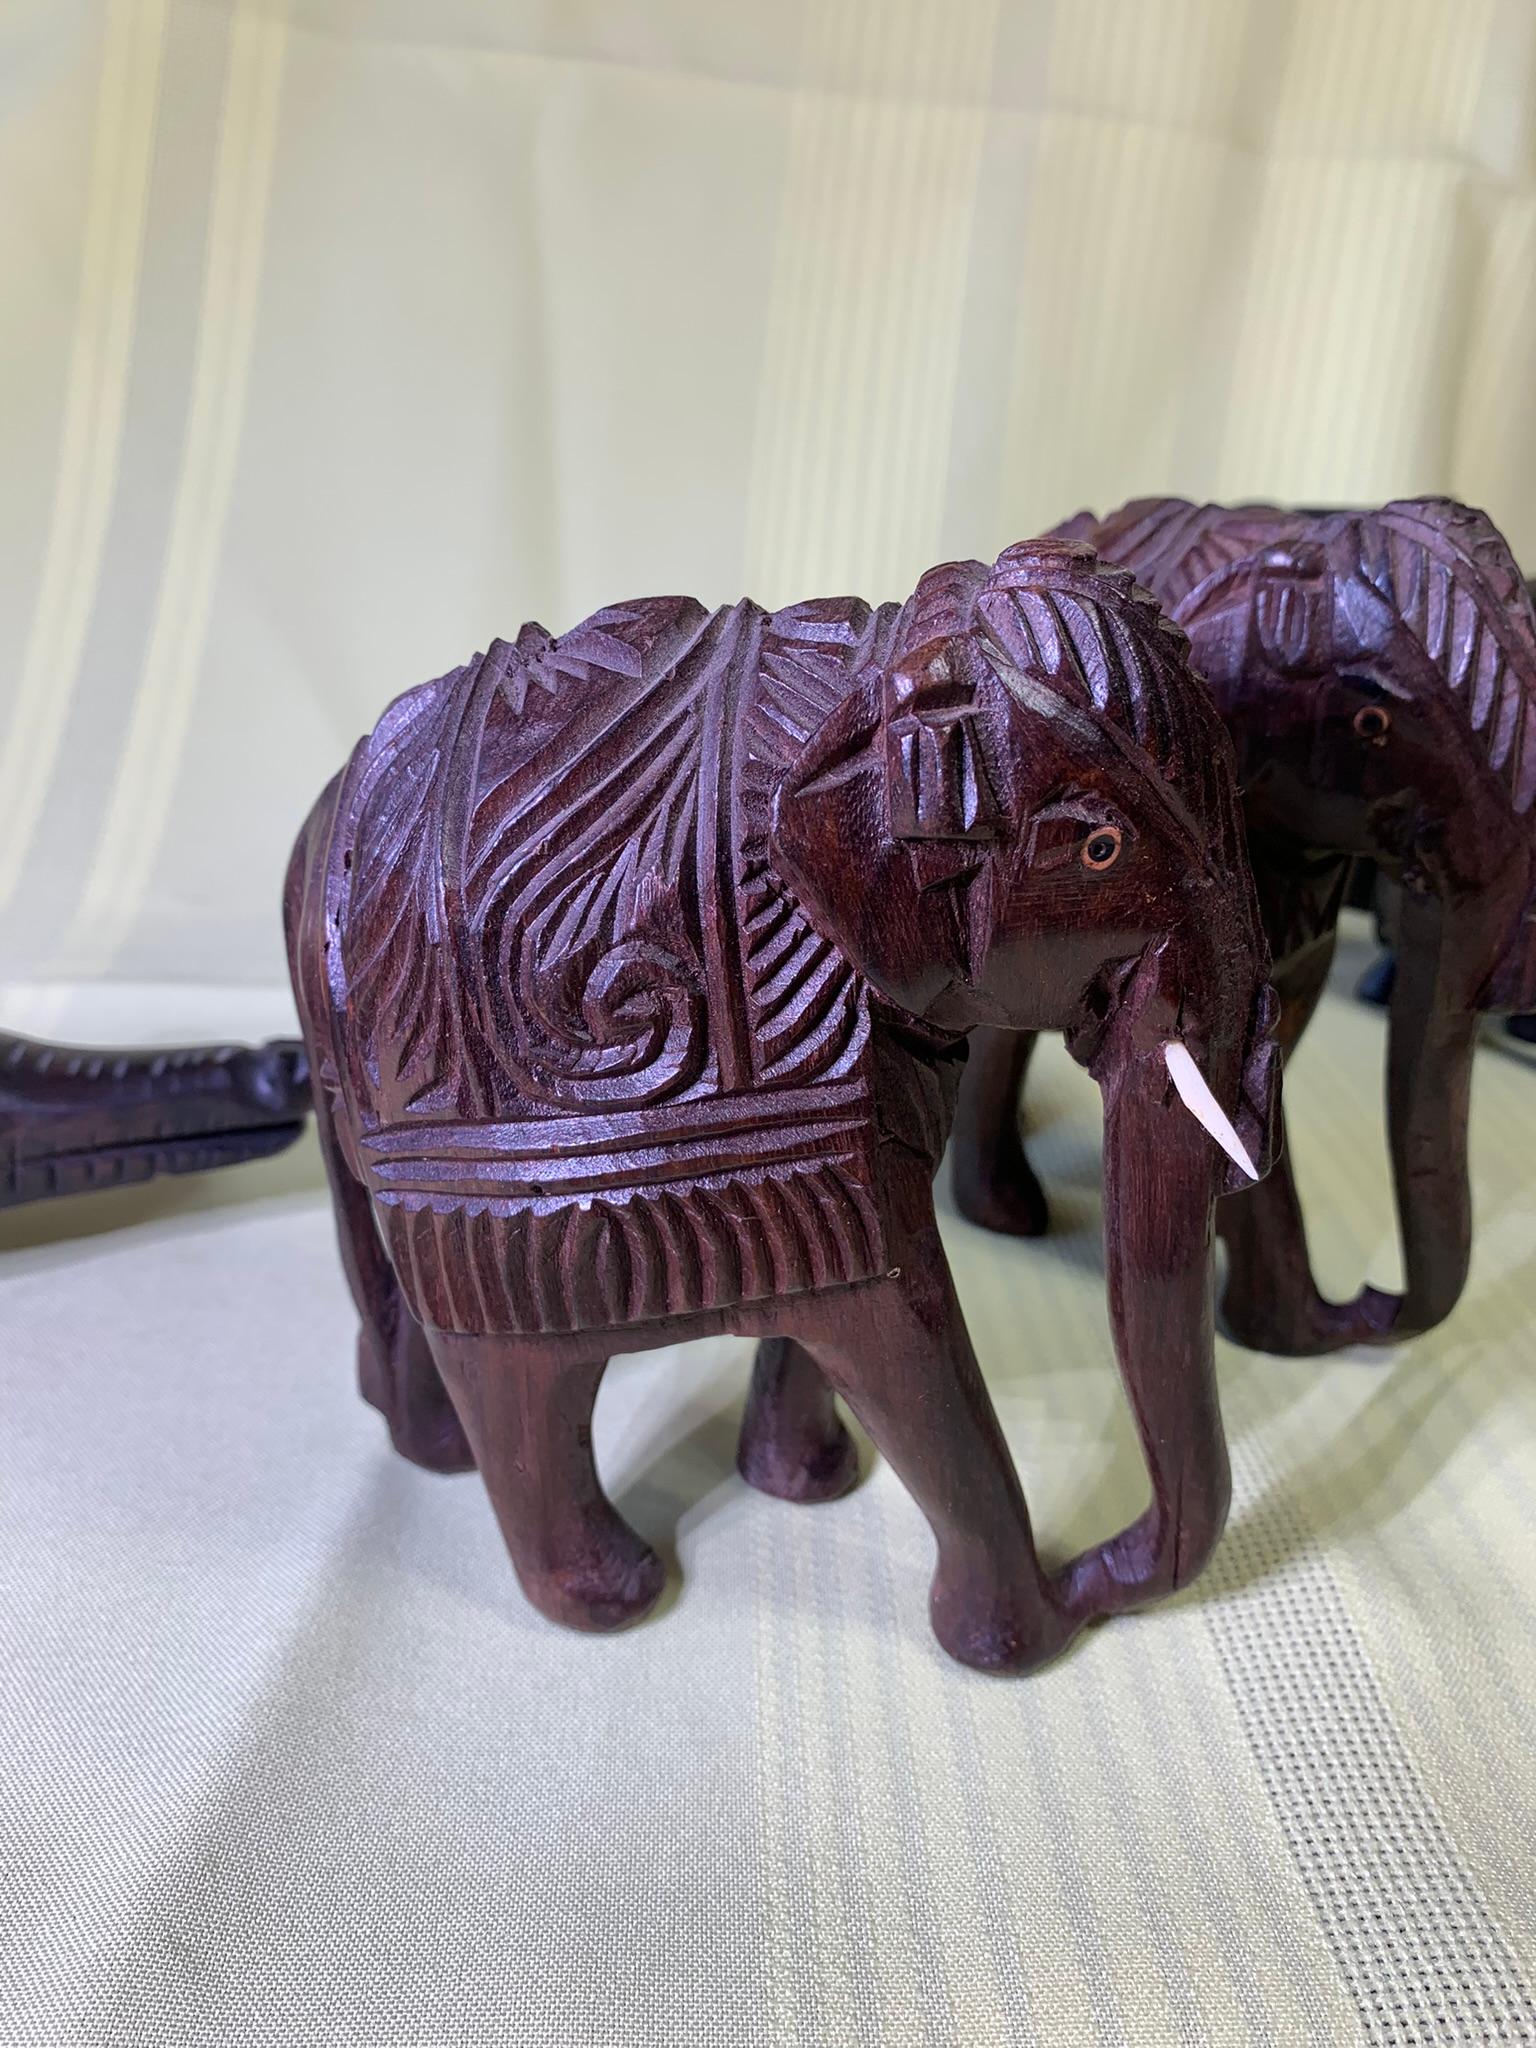 Group of Carved Wooden Animals - Some Made from Ebony from Africa